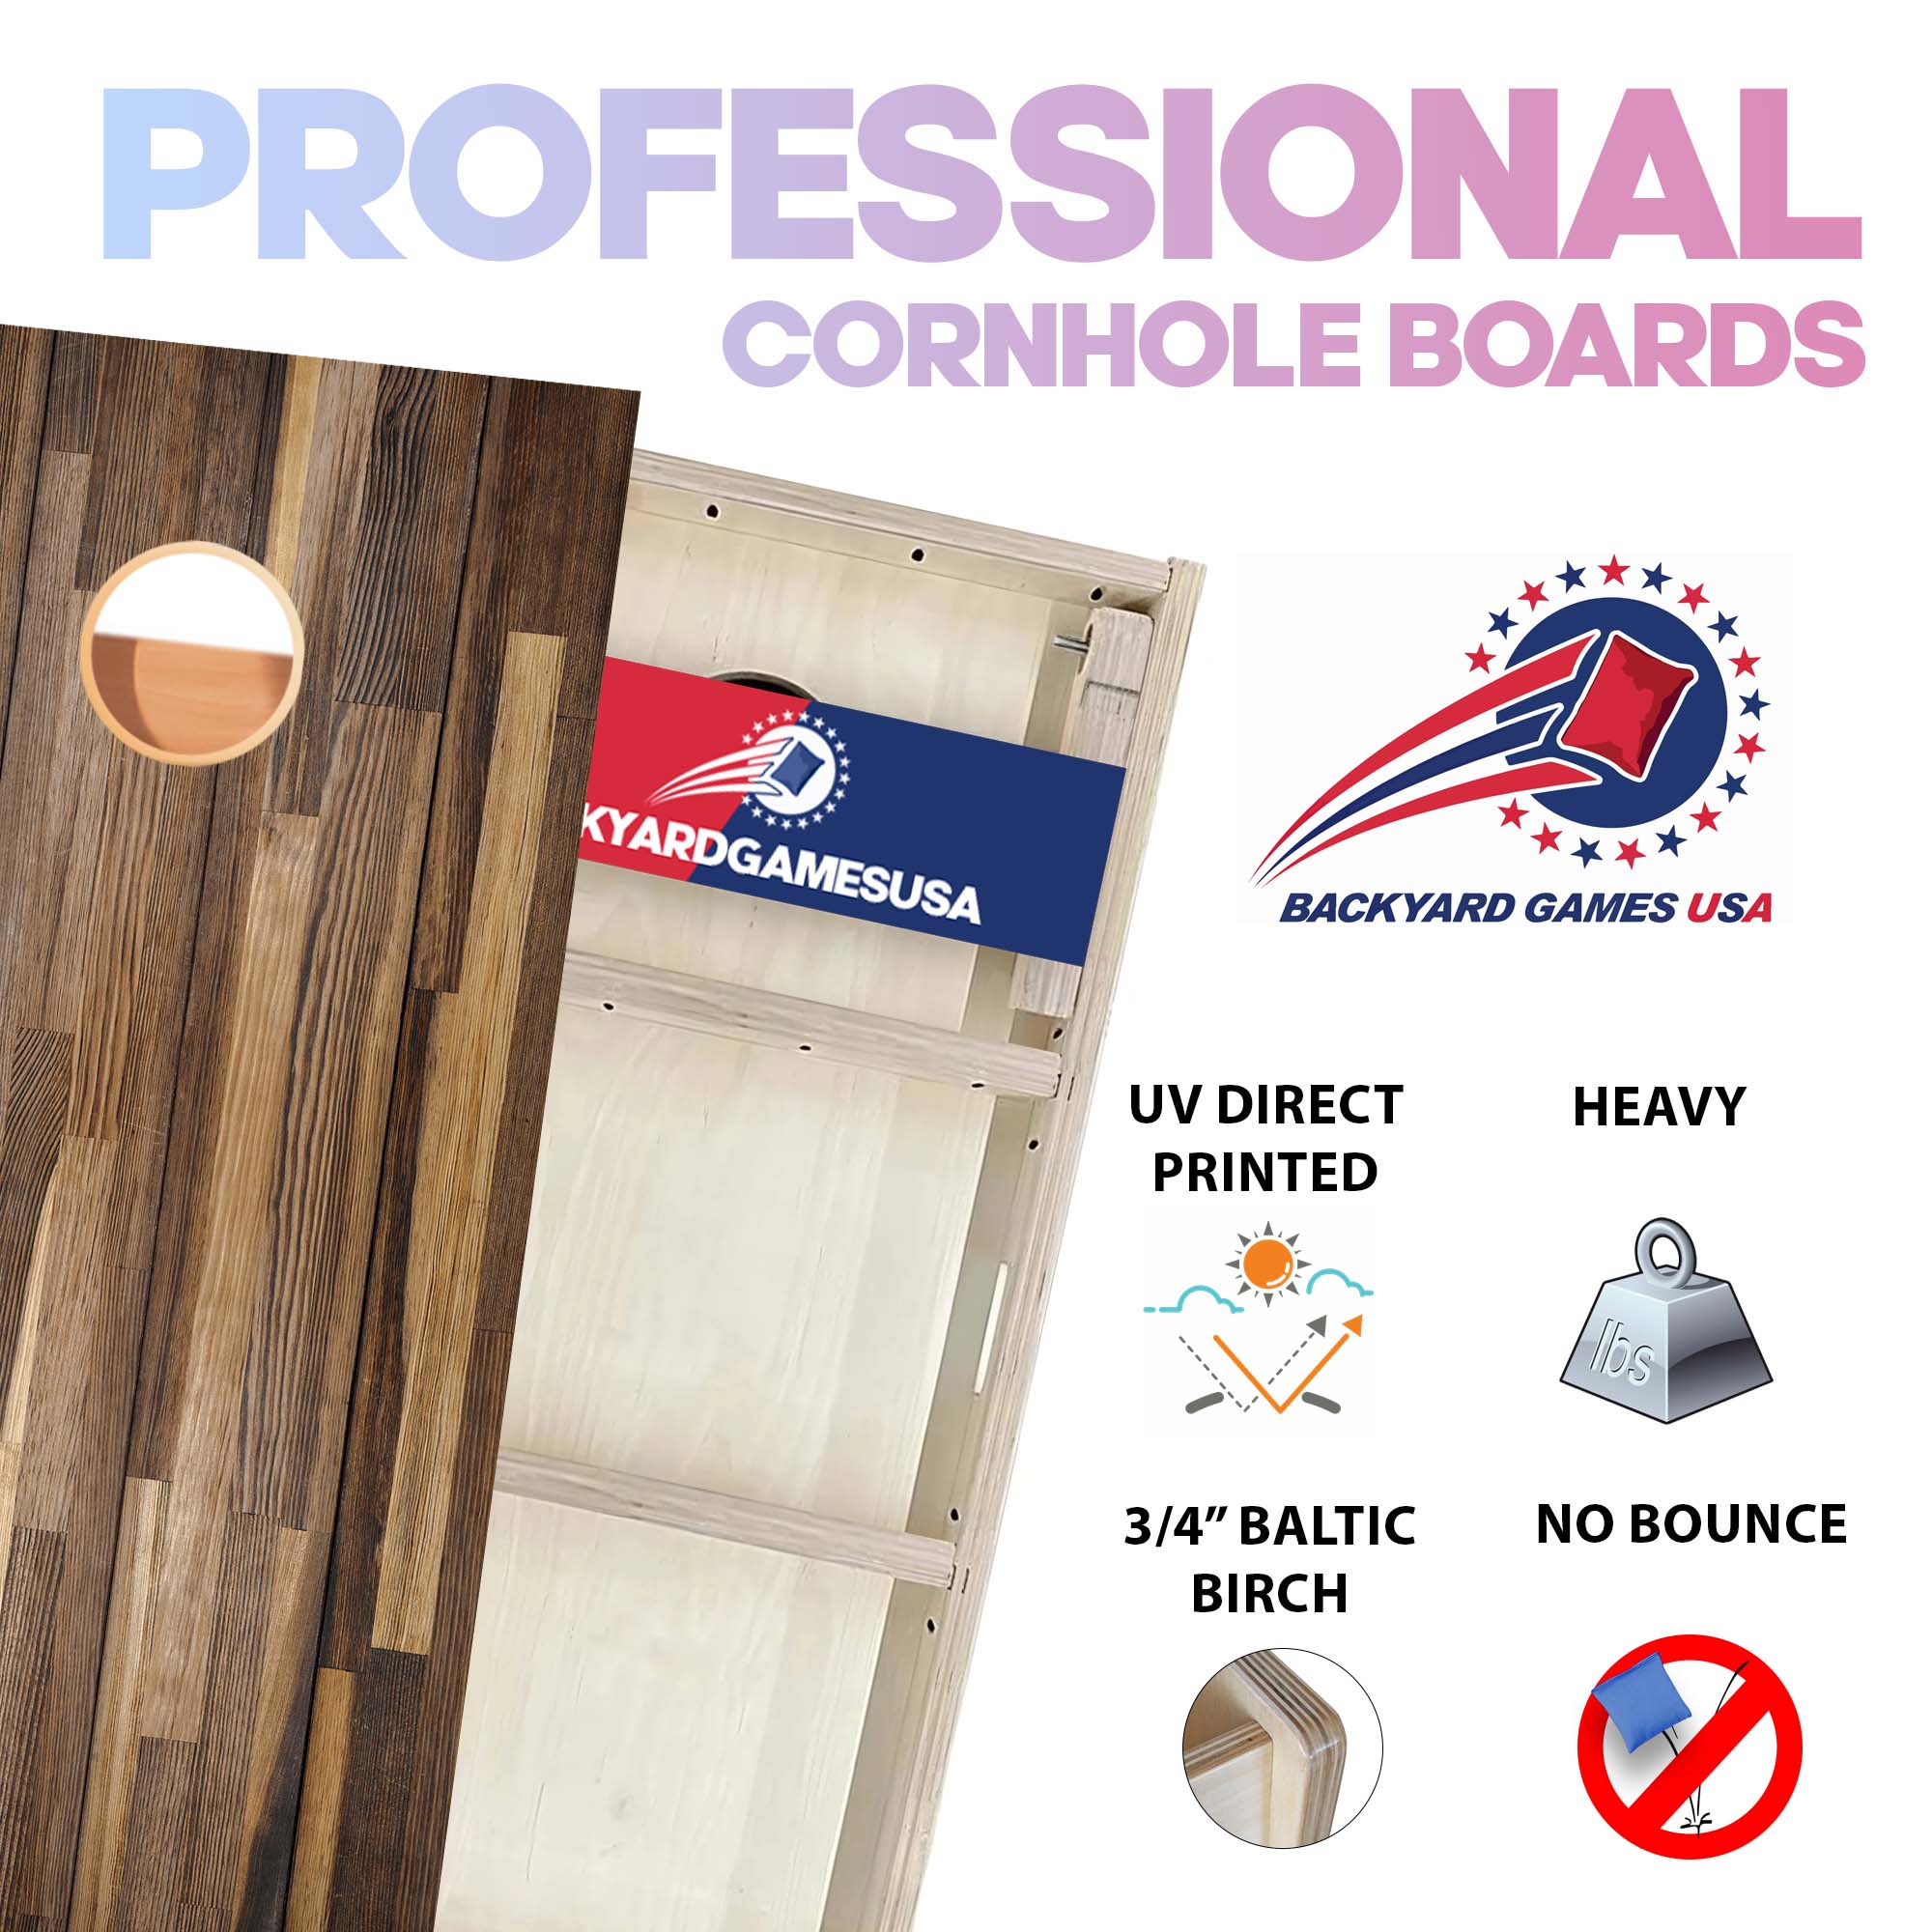 Plank Stained Professional Cornhole Boards